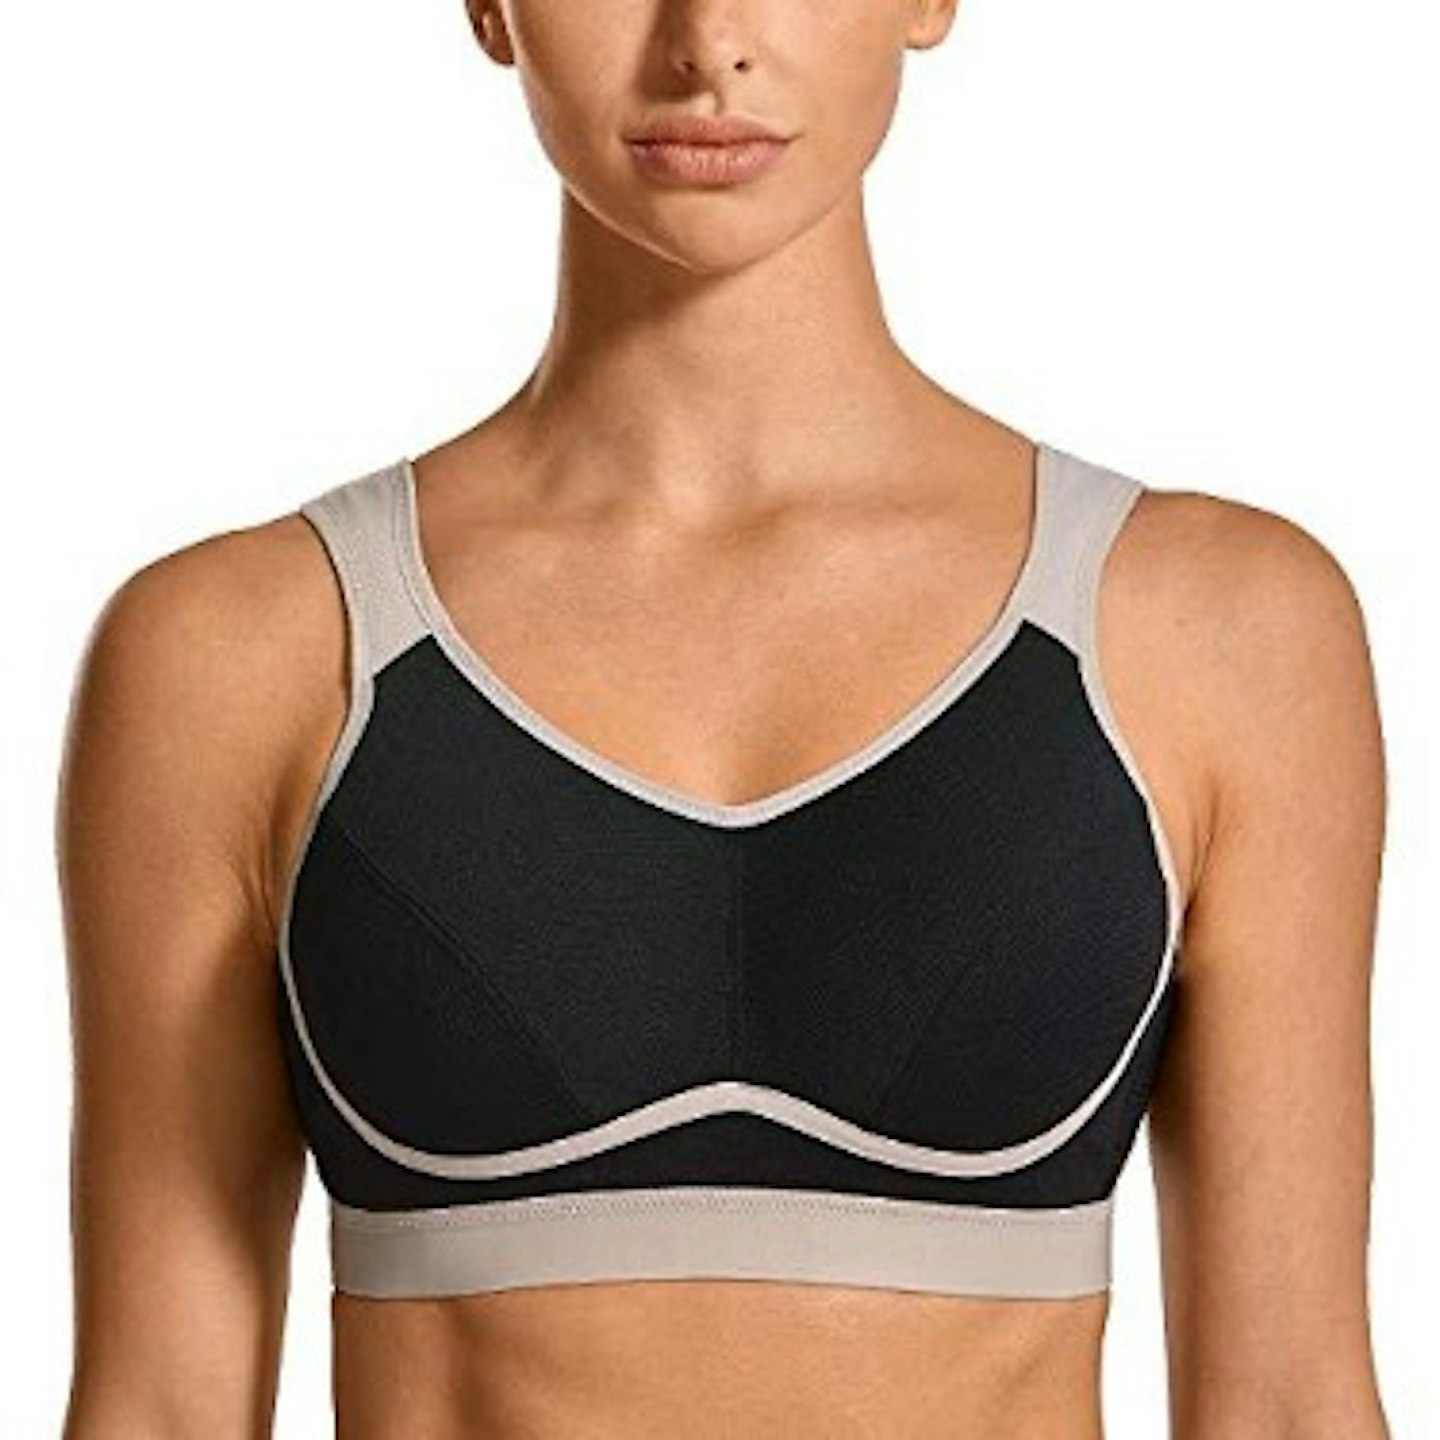 SYROKAN Women Sports Bra Wirefree High Impact Plus Size Full Support Padded